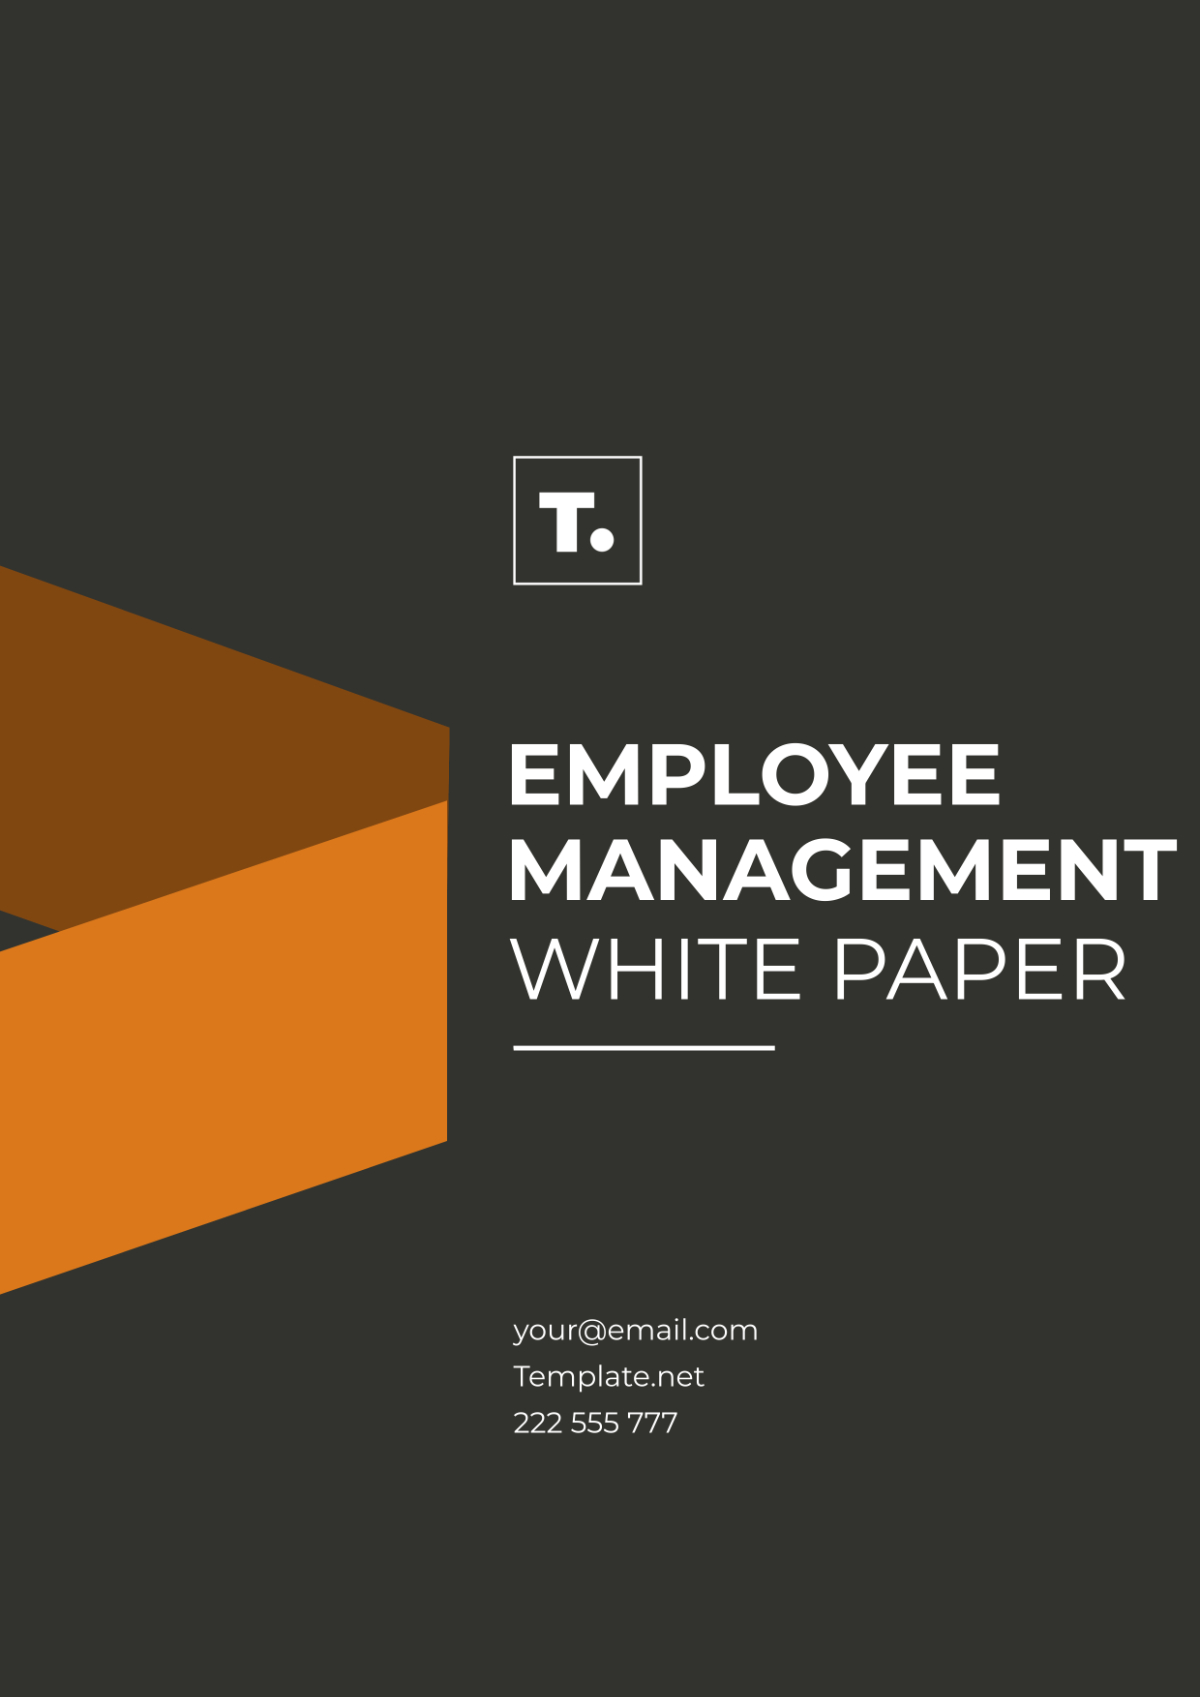 Employee Management White Paper Template